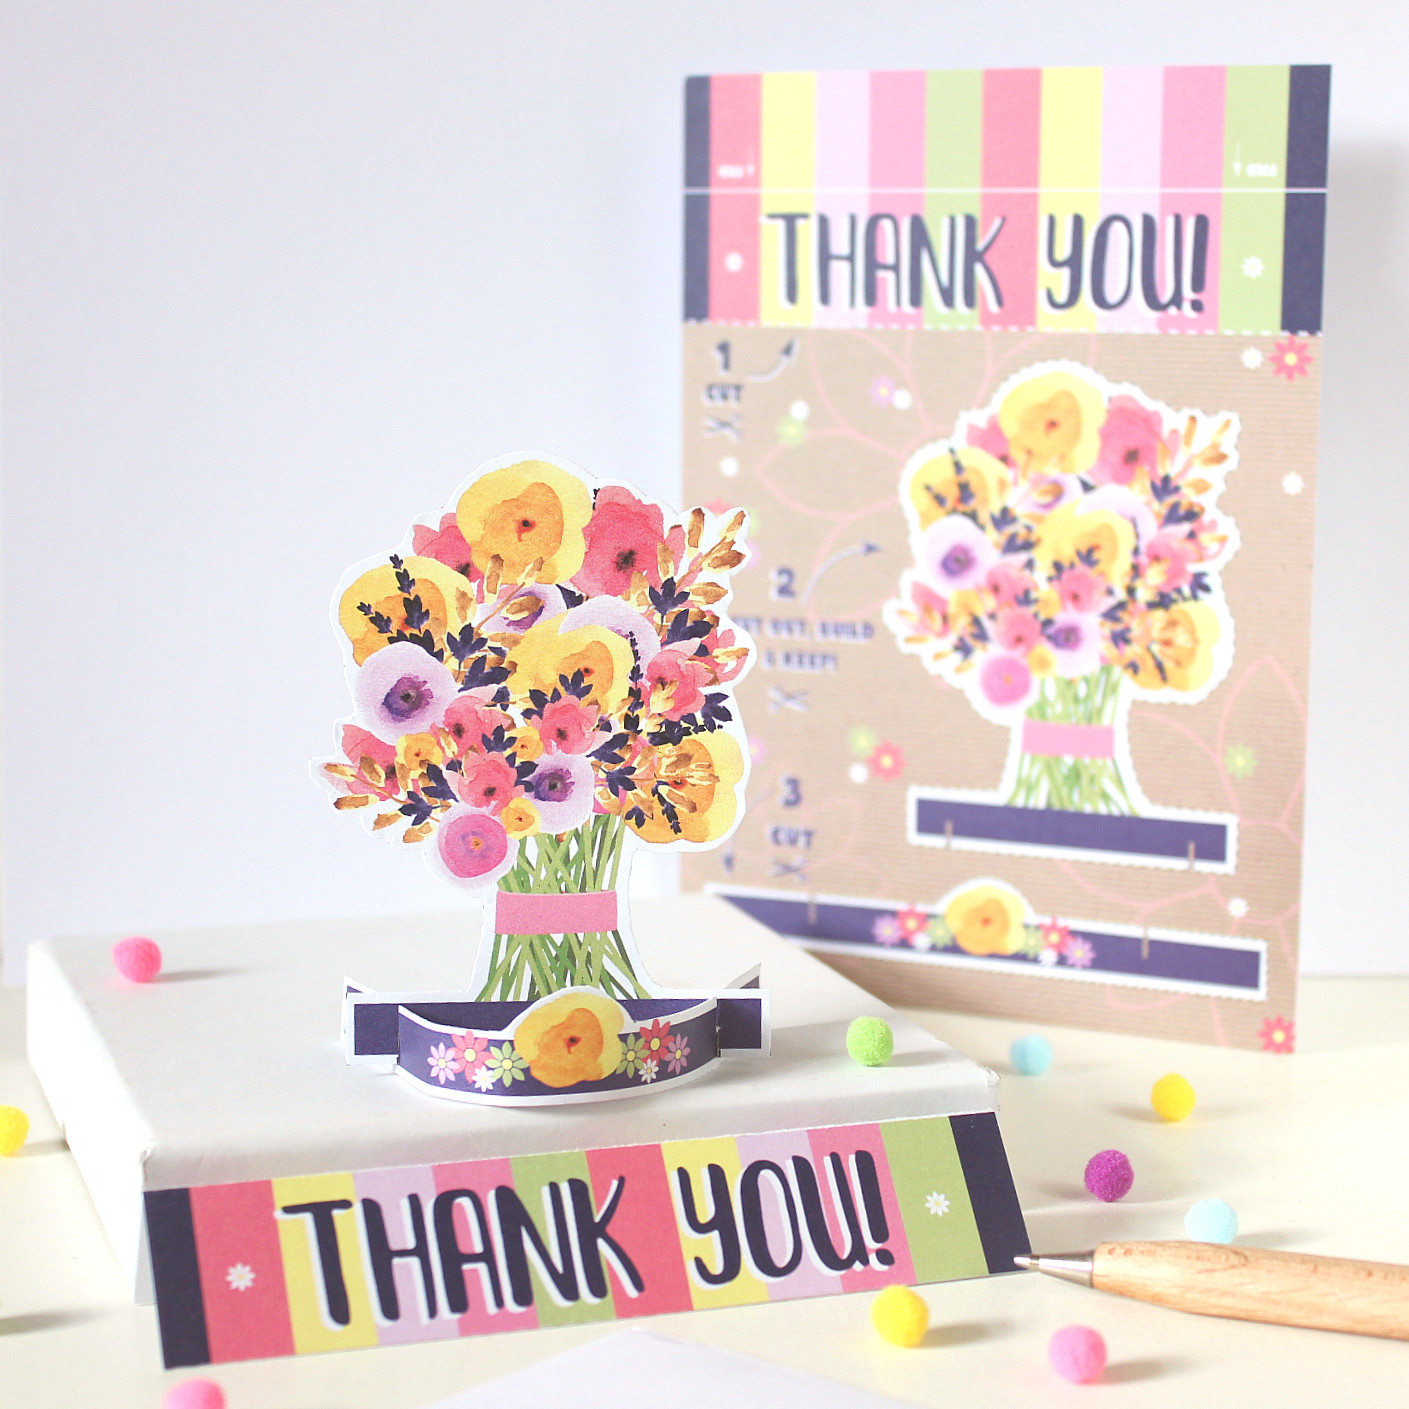 Thank You Flower Bouquet, Cut Out and Keep Card